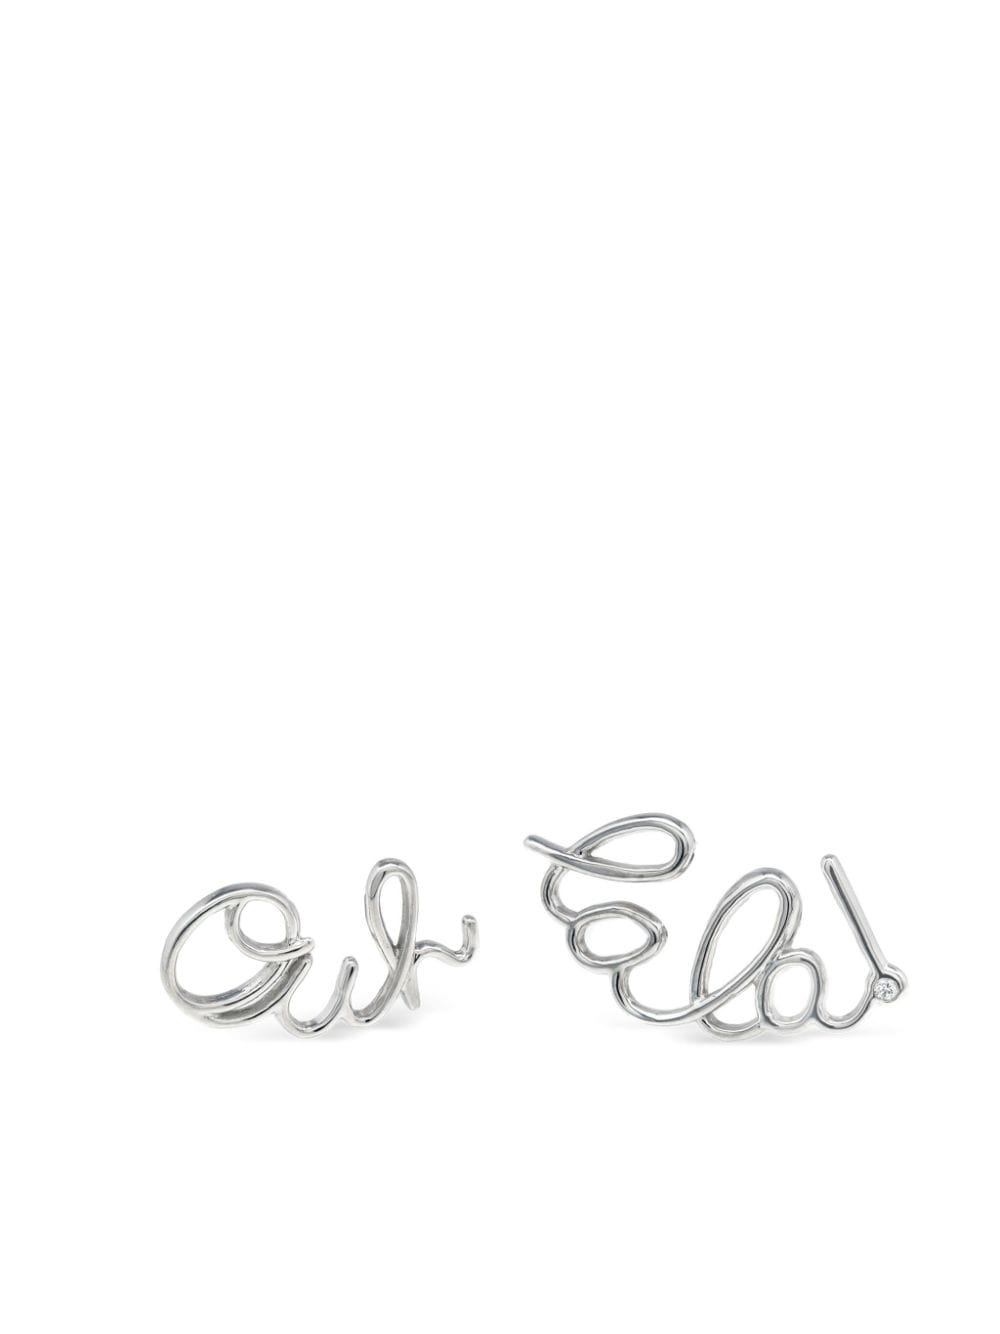 LILY GABRIELLA 18kt white gold Ouh Lala stud earrings - Argento